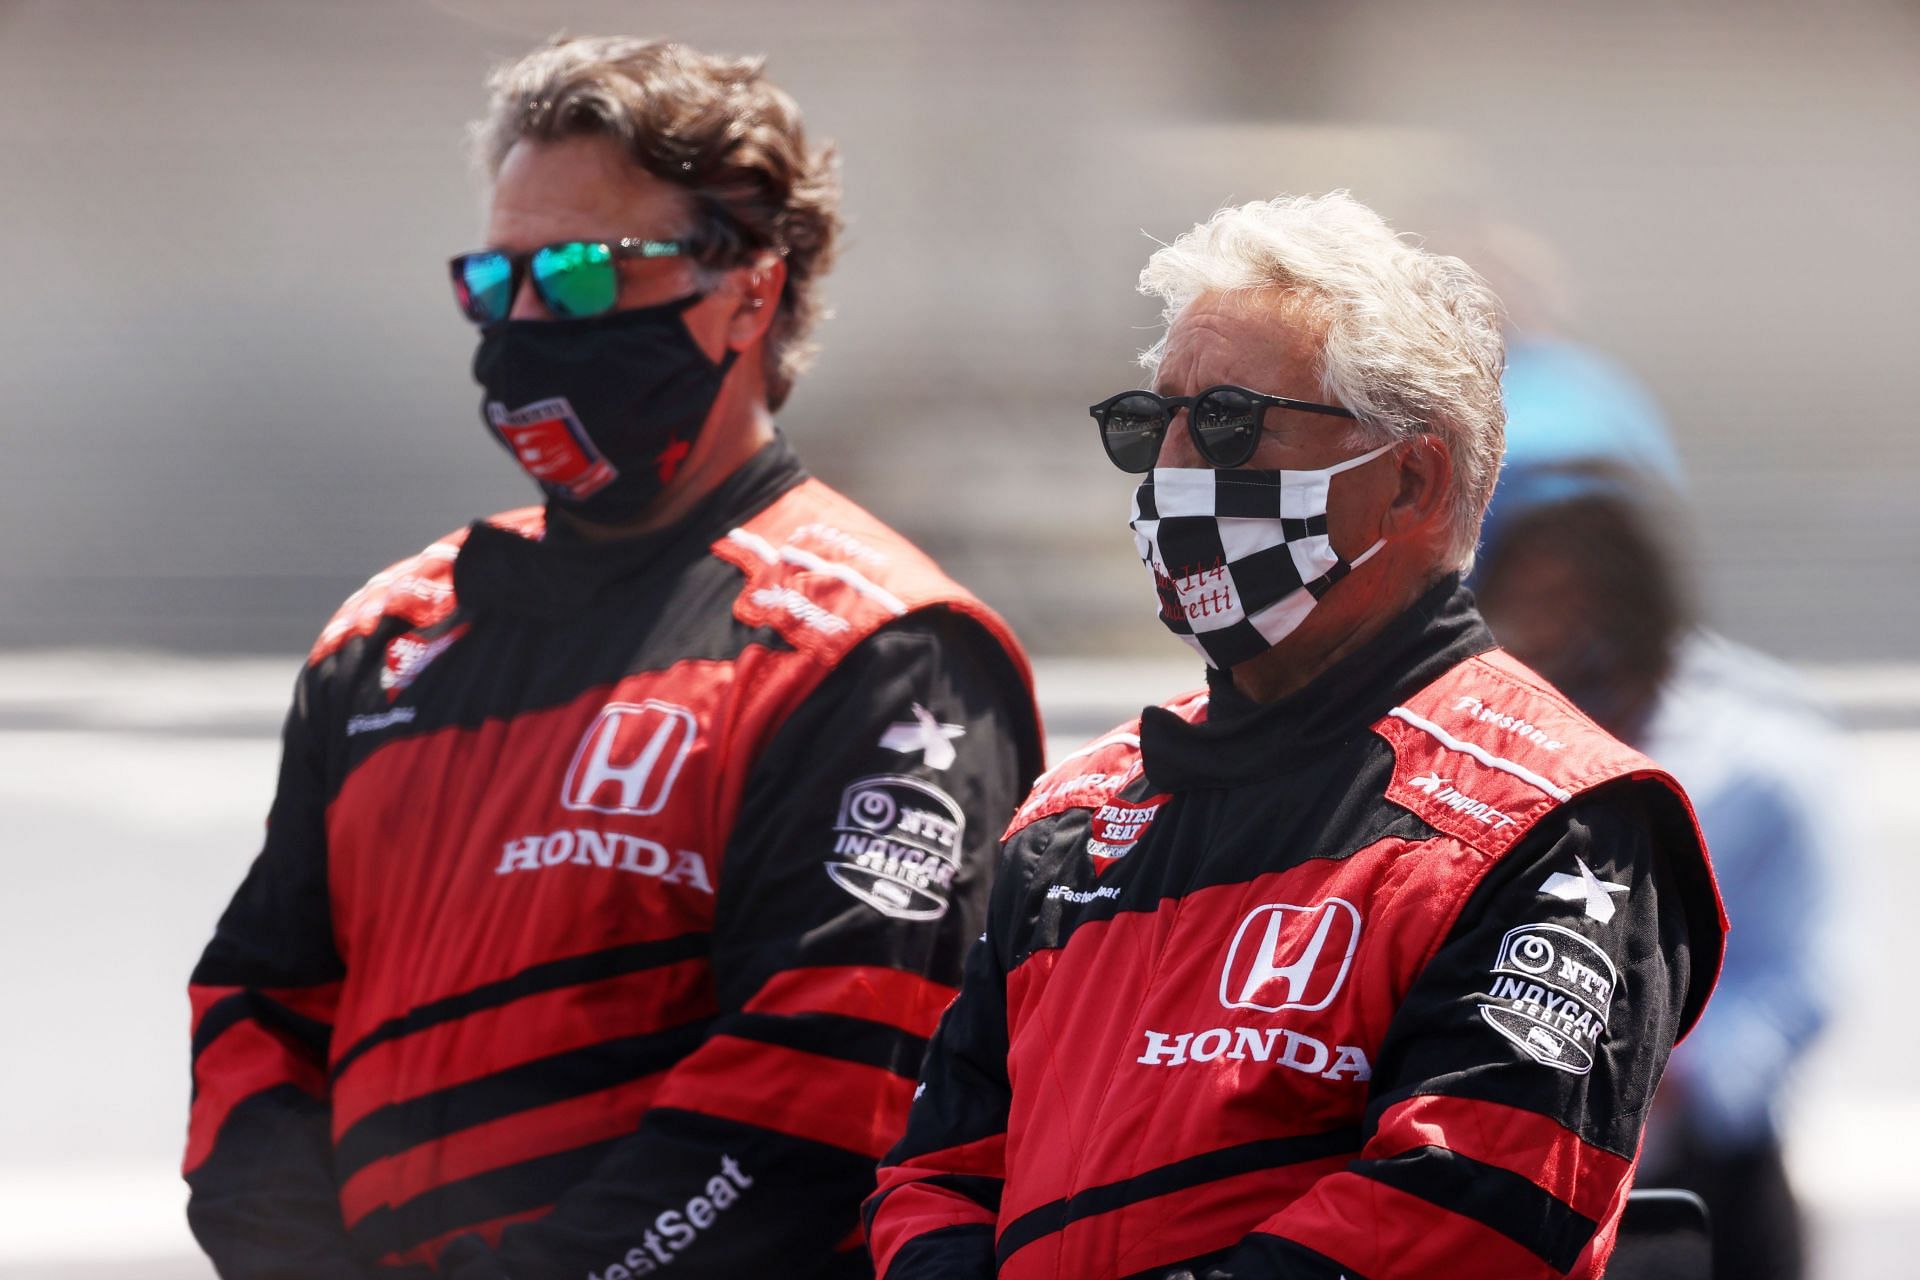 INDIANAPOLIS, INDIANA - AUGUST 23: Mario Andretti and his son Michael stand on the grid prior to the 104th running of the Indianapolis 500 at Indianapolis Motor Speedway on August 23, 2020 in Indianapolis, Indiana. (Photo by Gregory Shamus/Getty Images)